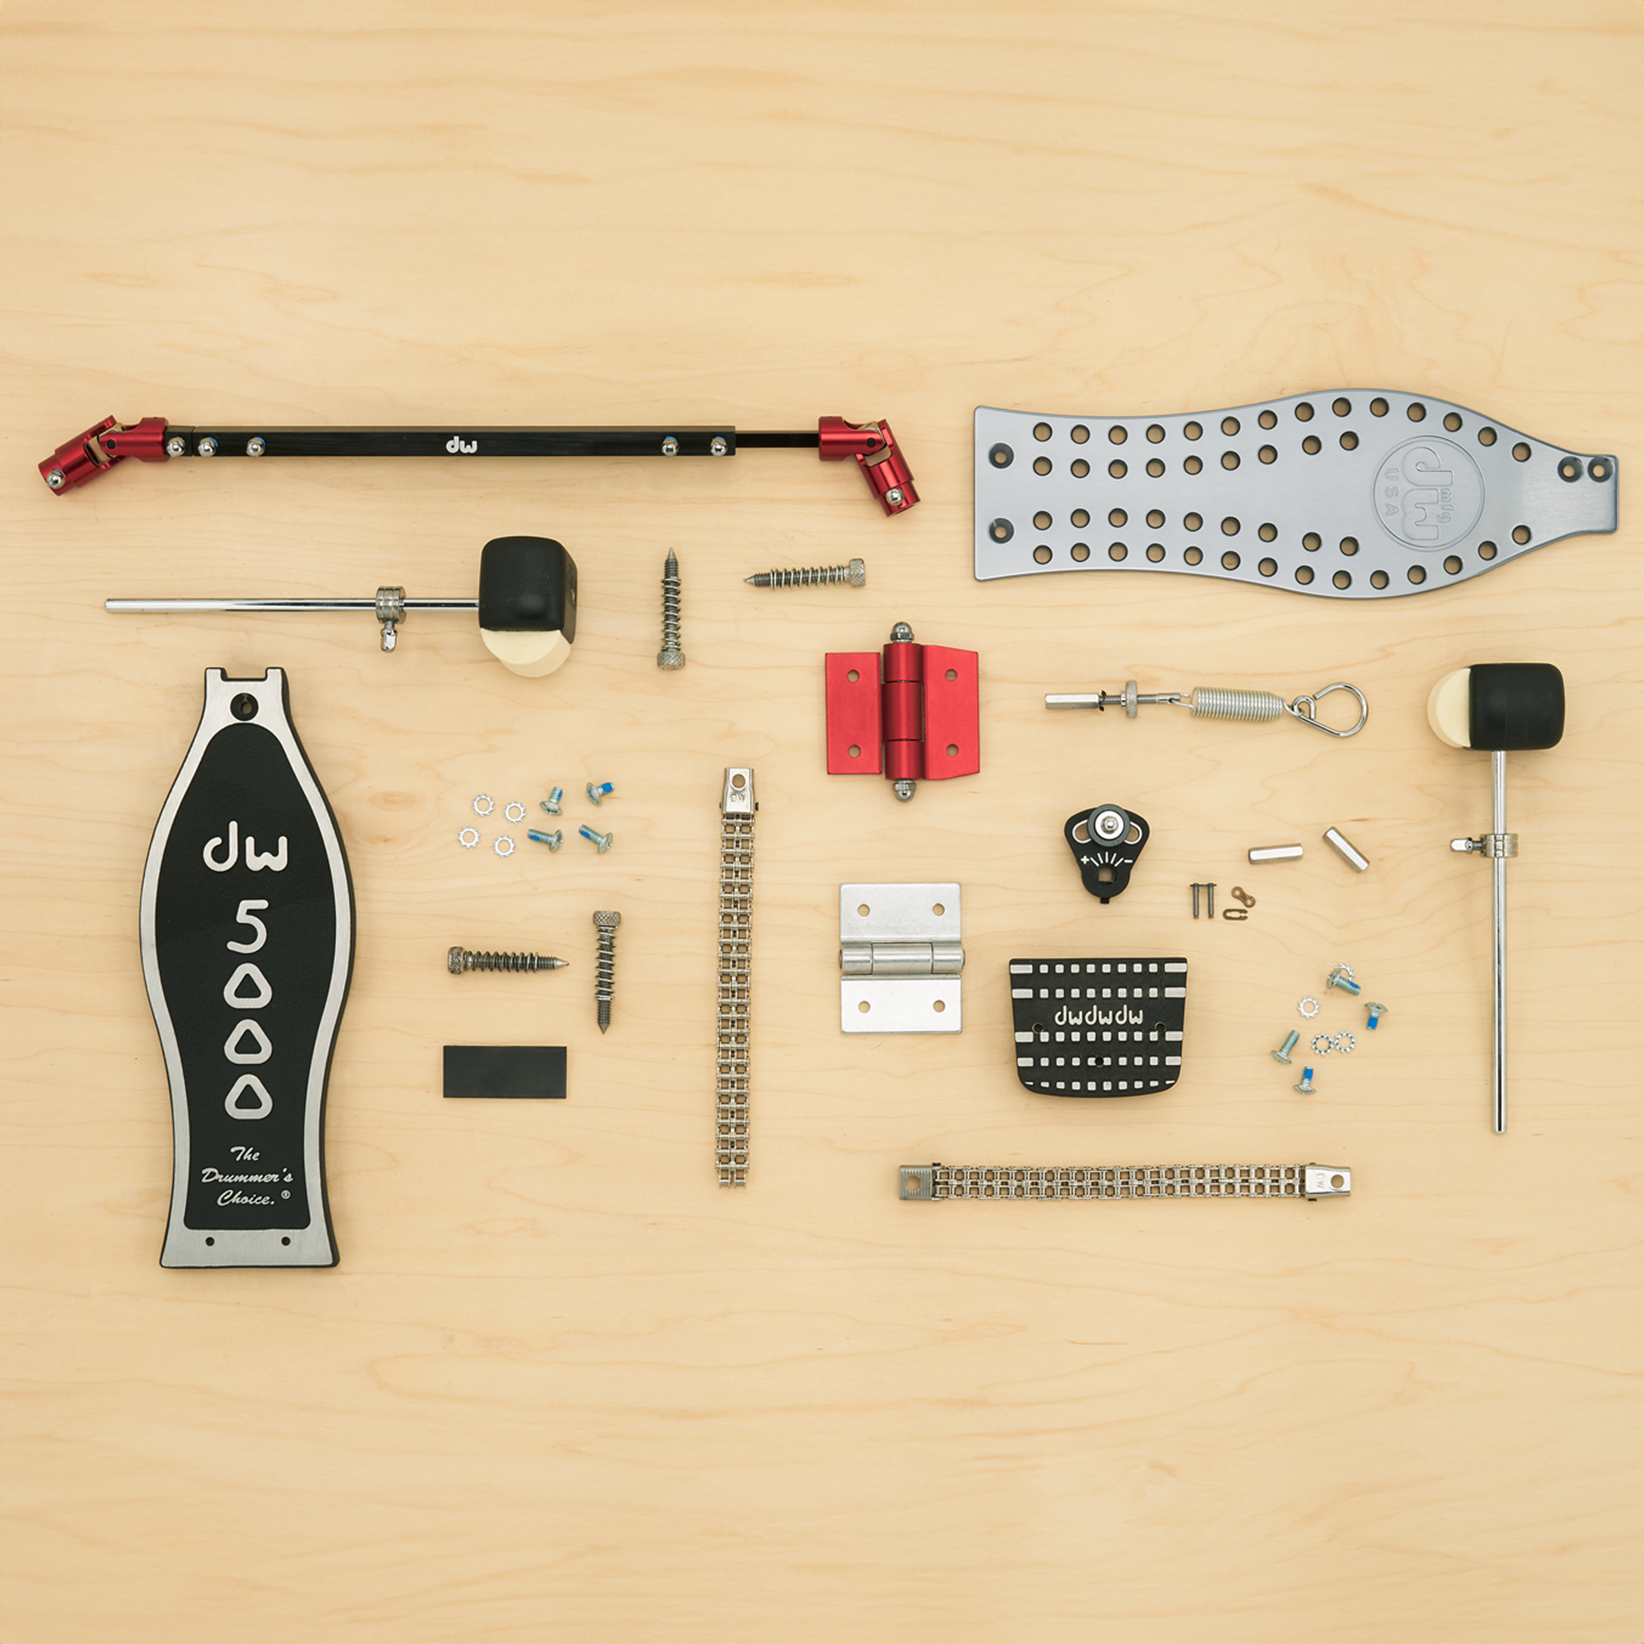 A collection of DW pedal parts including footboards, beaters, bearings, chains, heel plates, and more.